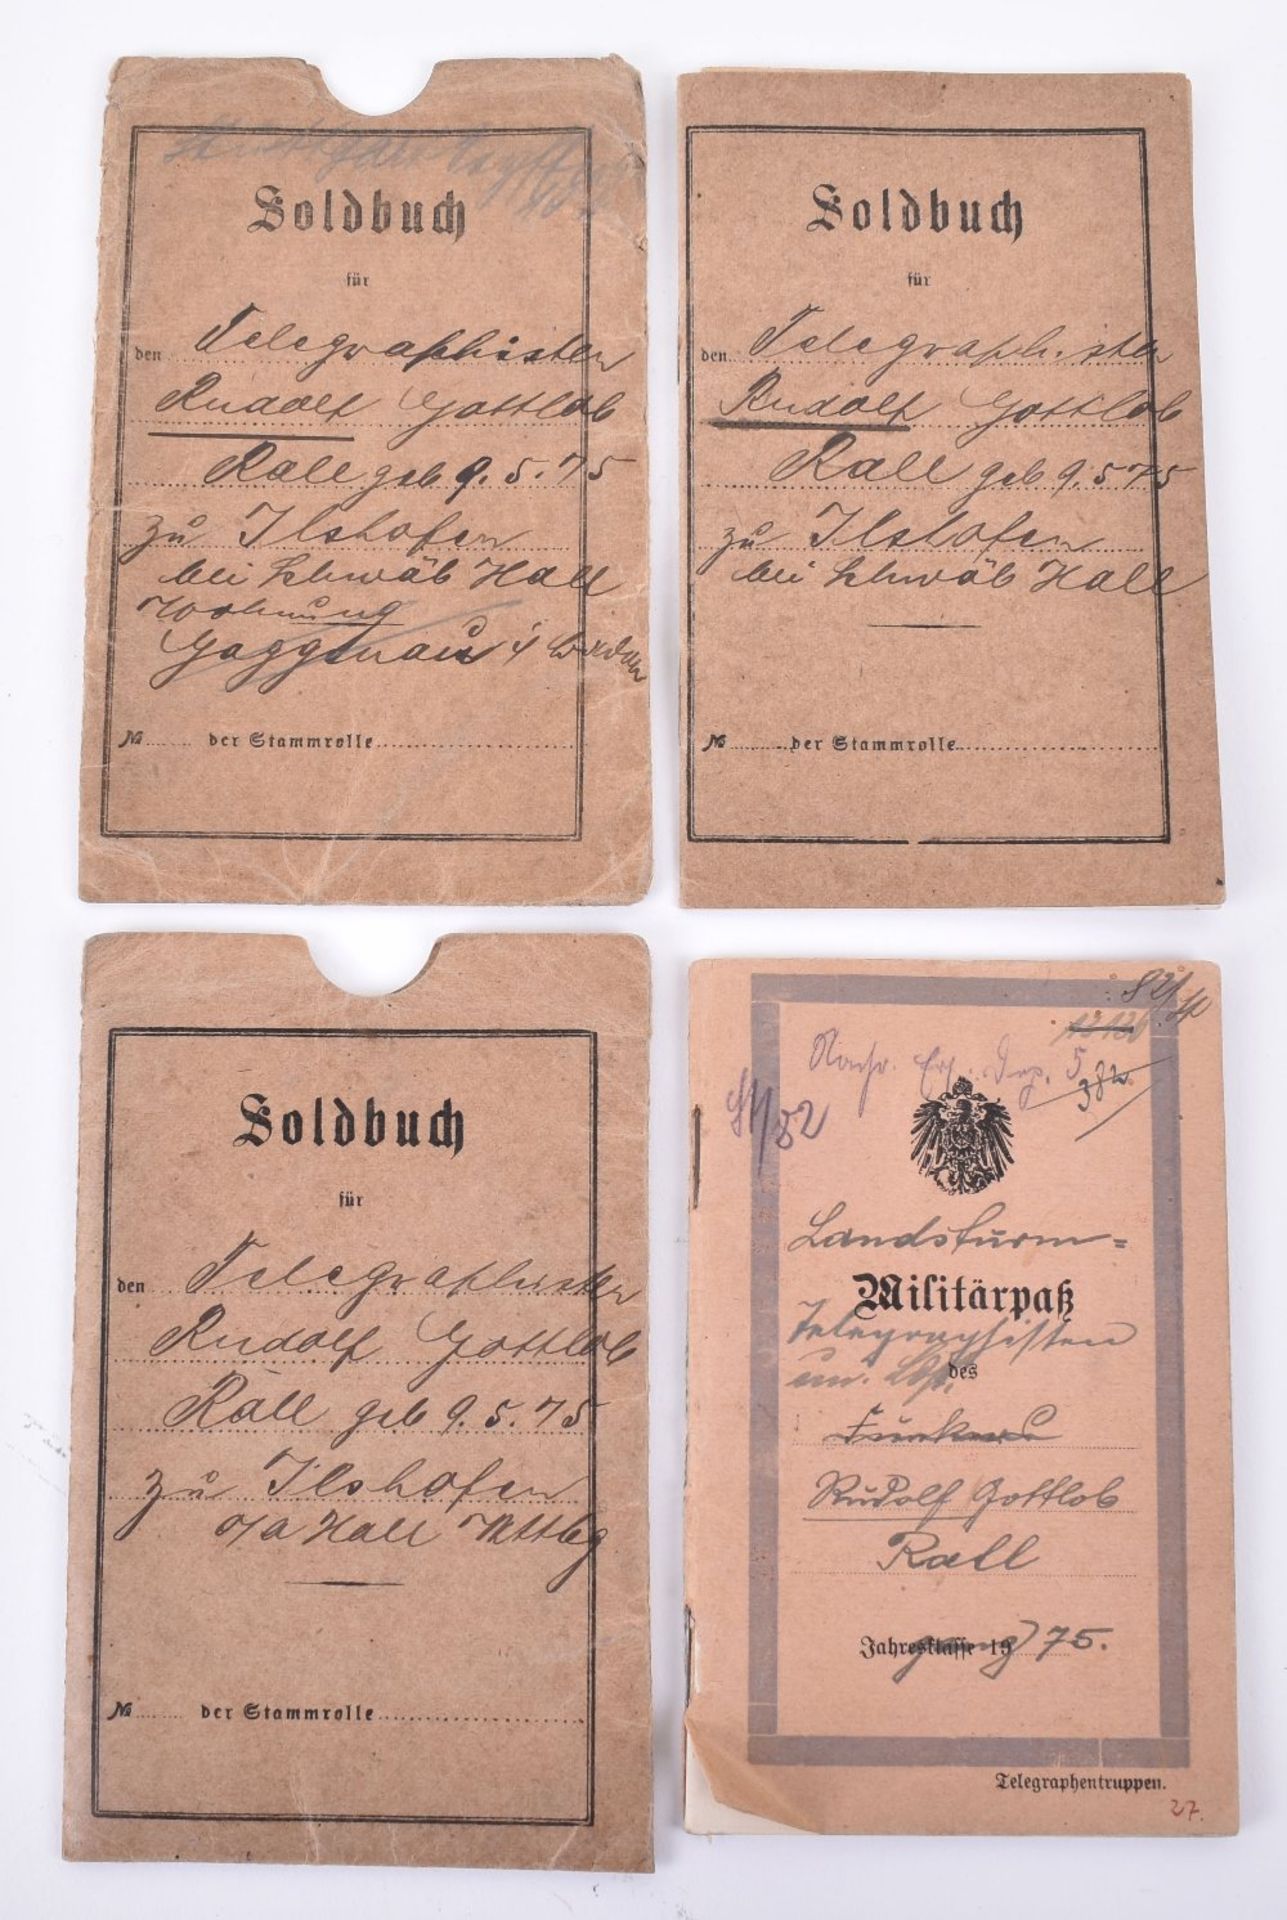 WW1 Soldbuch and Militarpass of Gunther Rall’s Father Rudolf Gottlob Rall